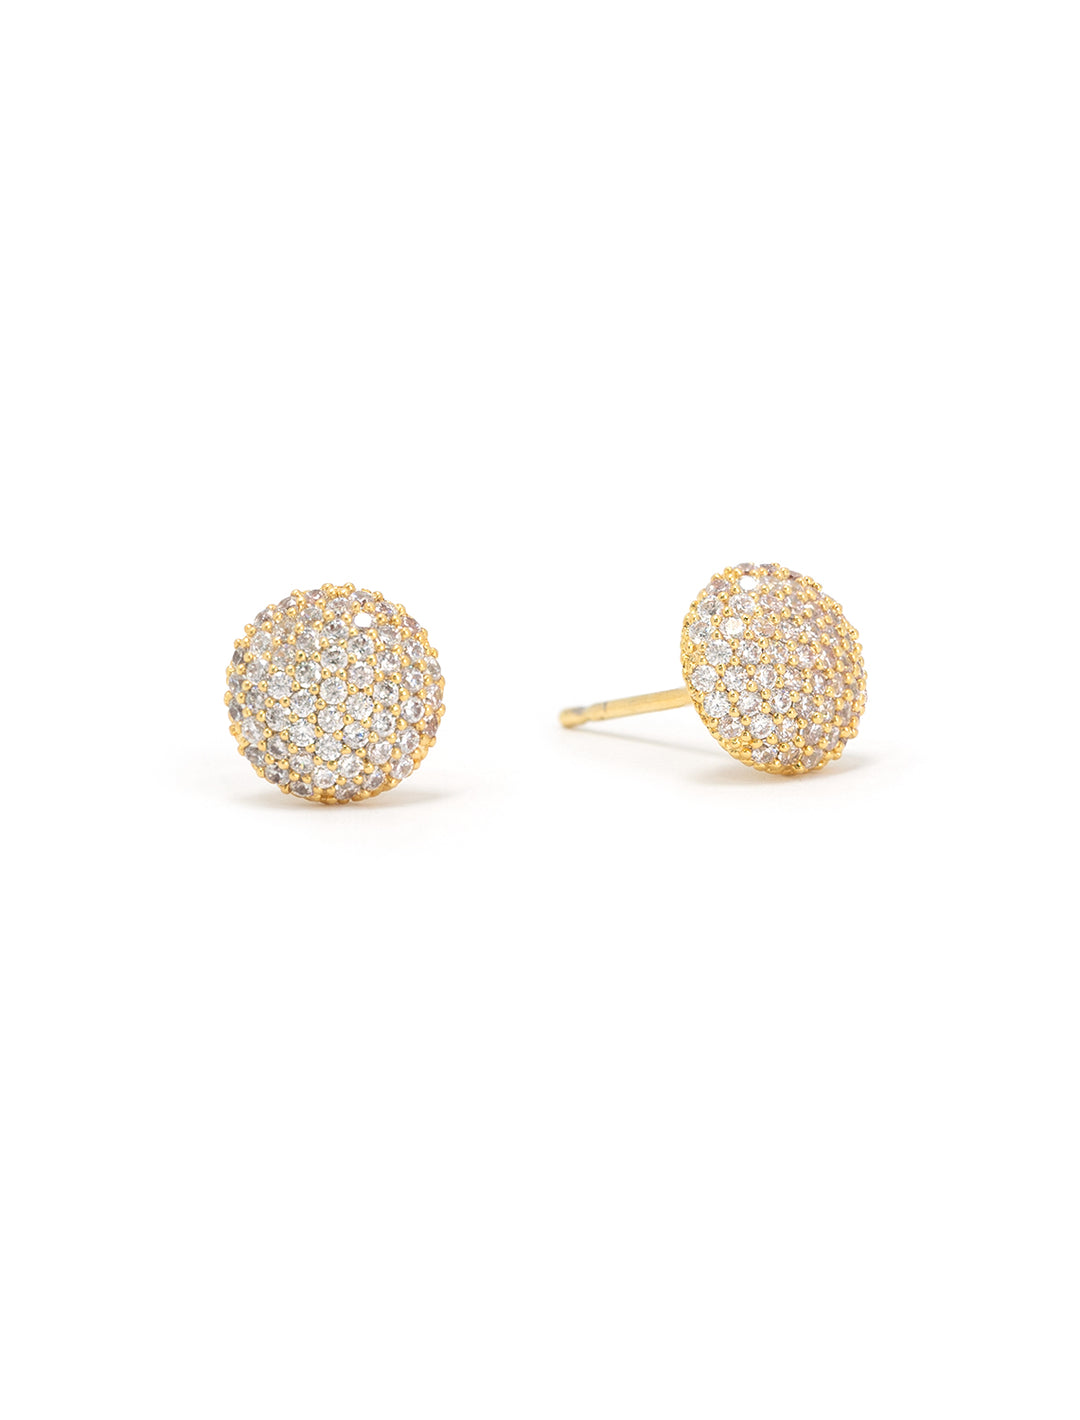 Front view of Tai's cz button studs in gold.